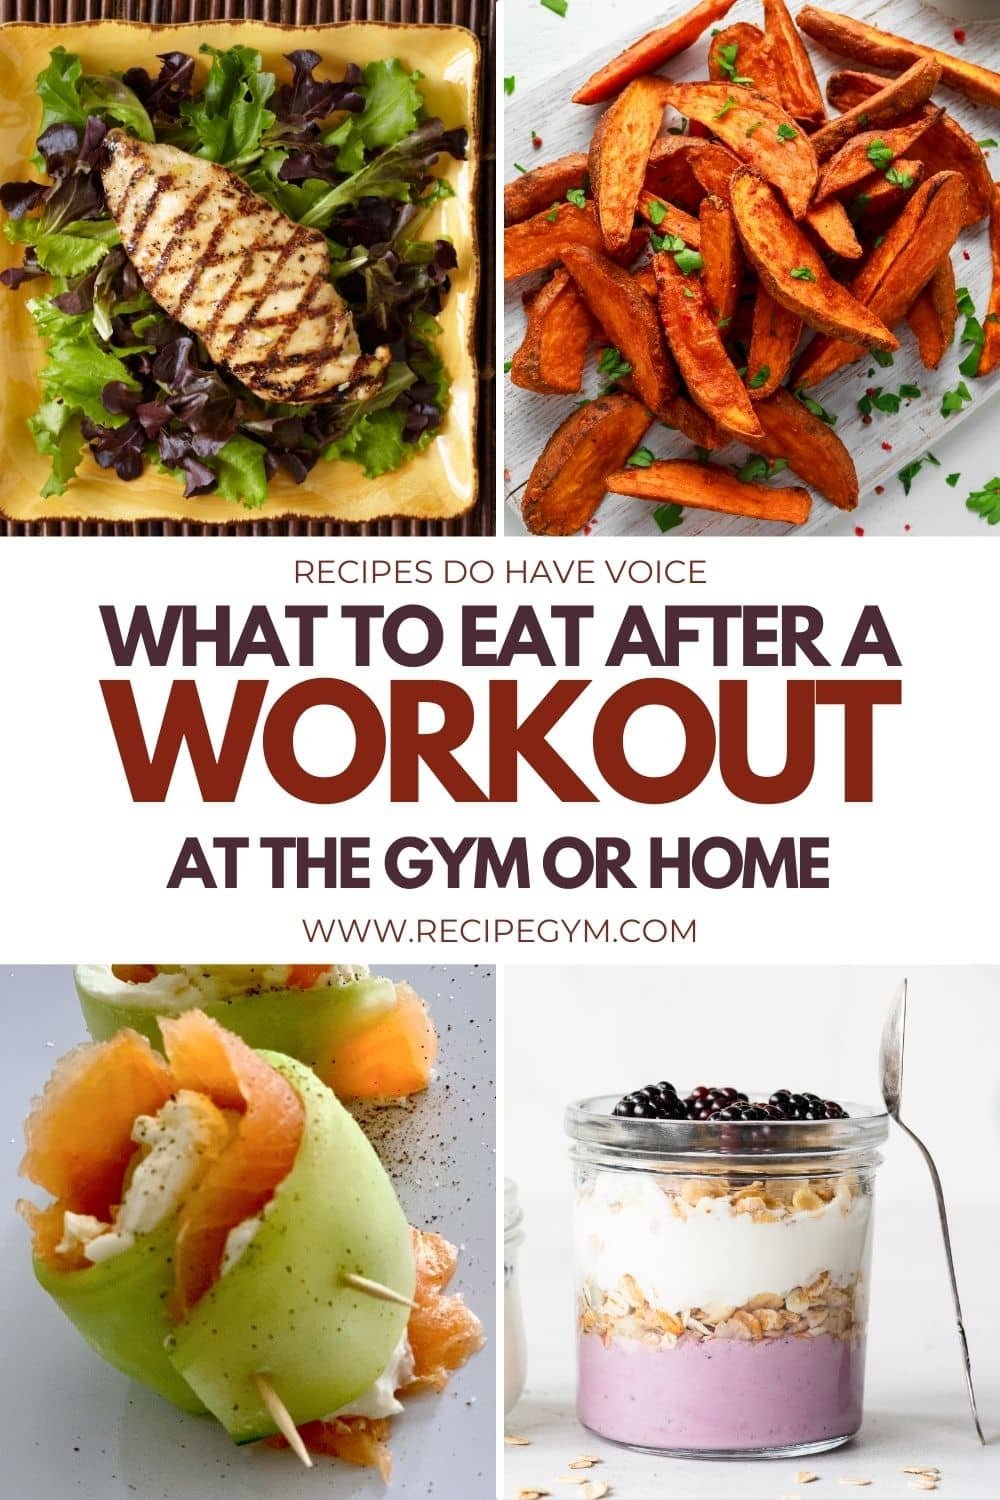 What to eat after a workout